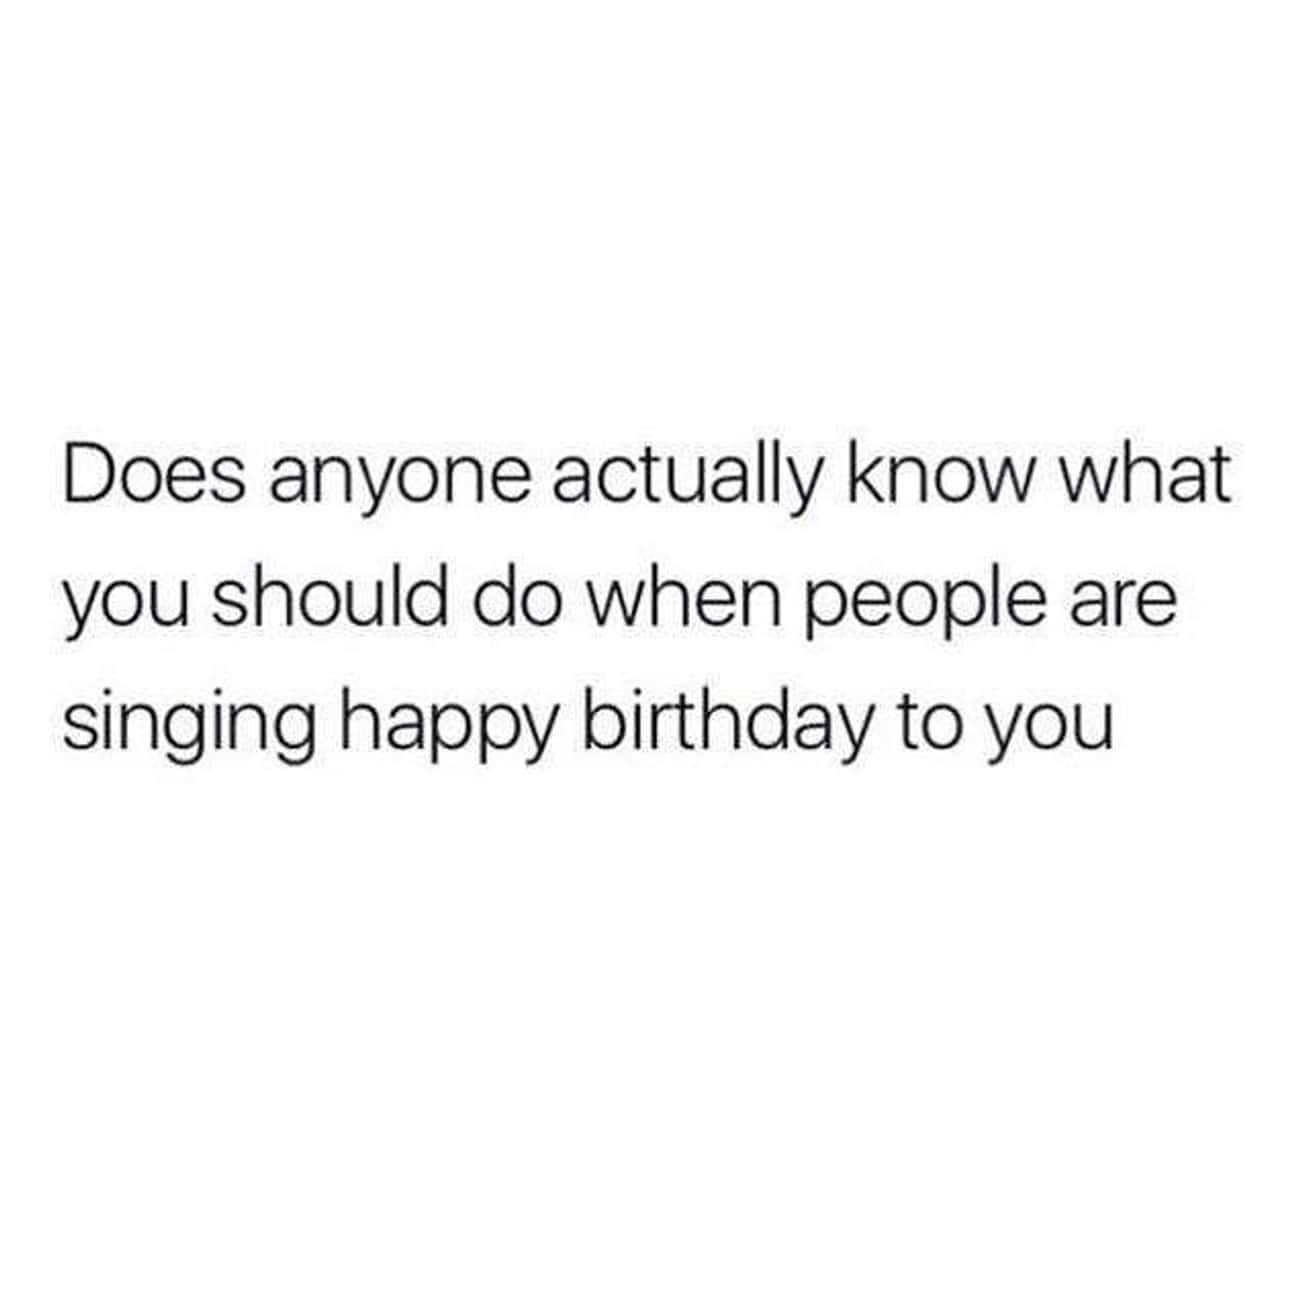 Crappy Birthday To You...